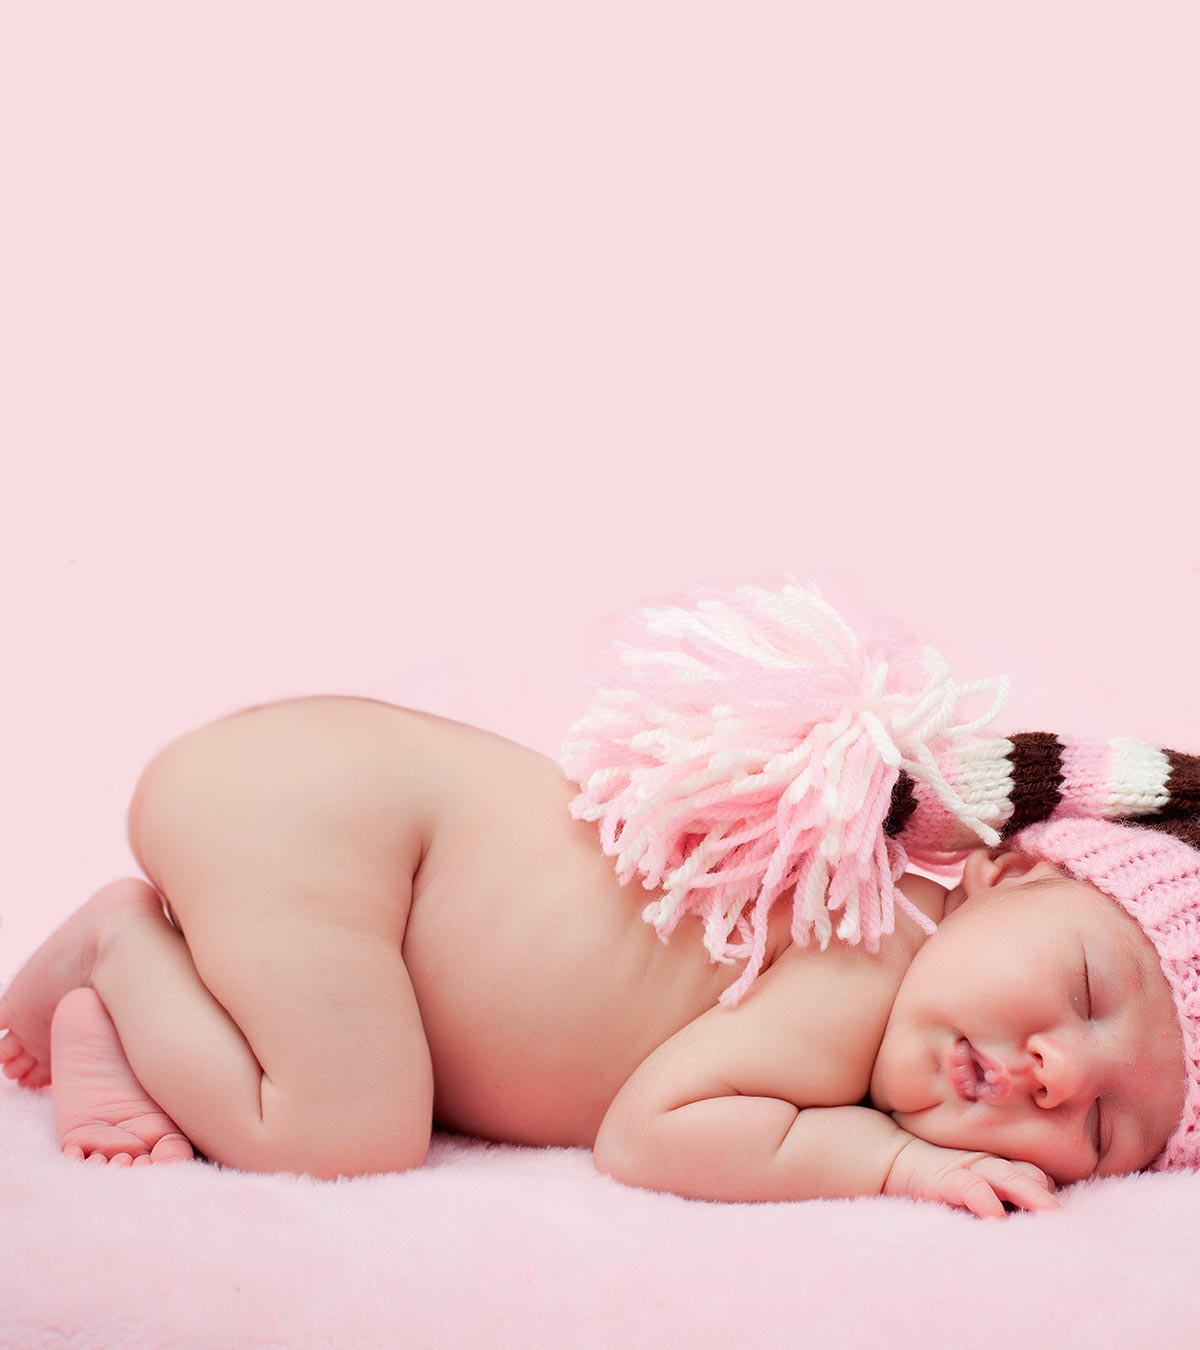 103 Wonderful Baby Names Meaning Peace For Boys And Girls